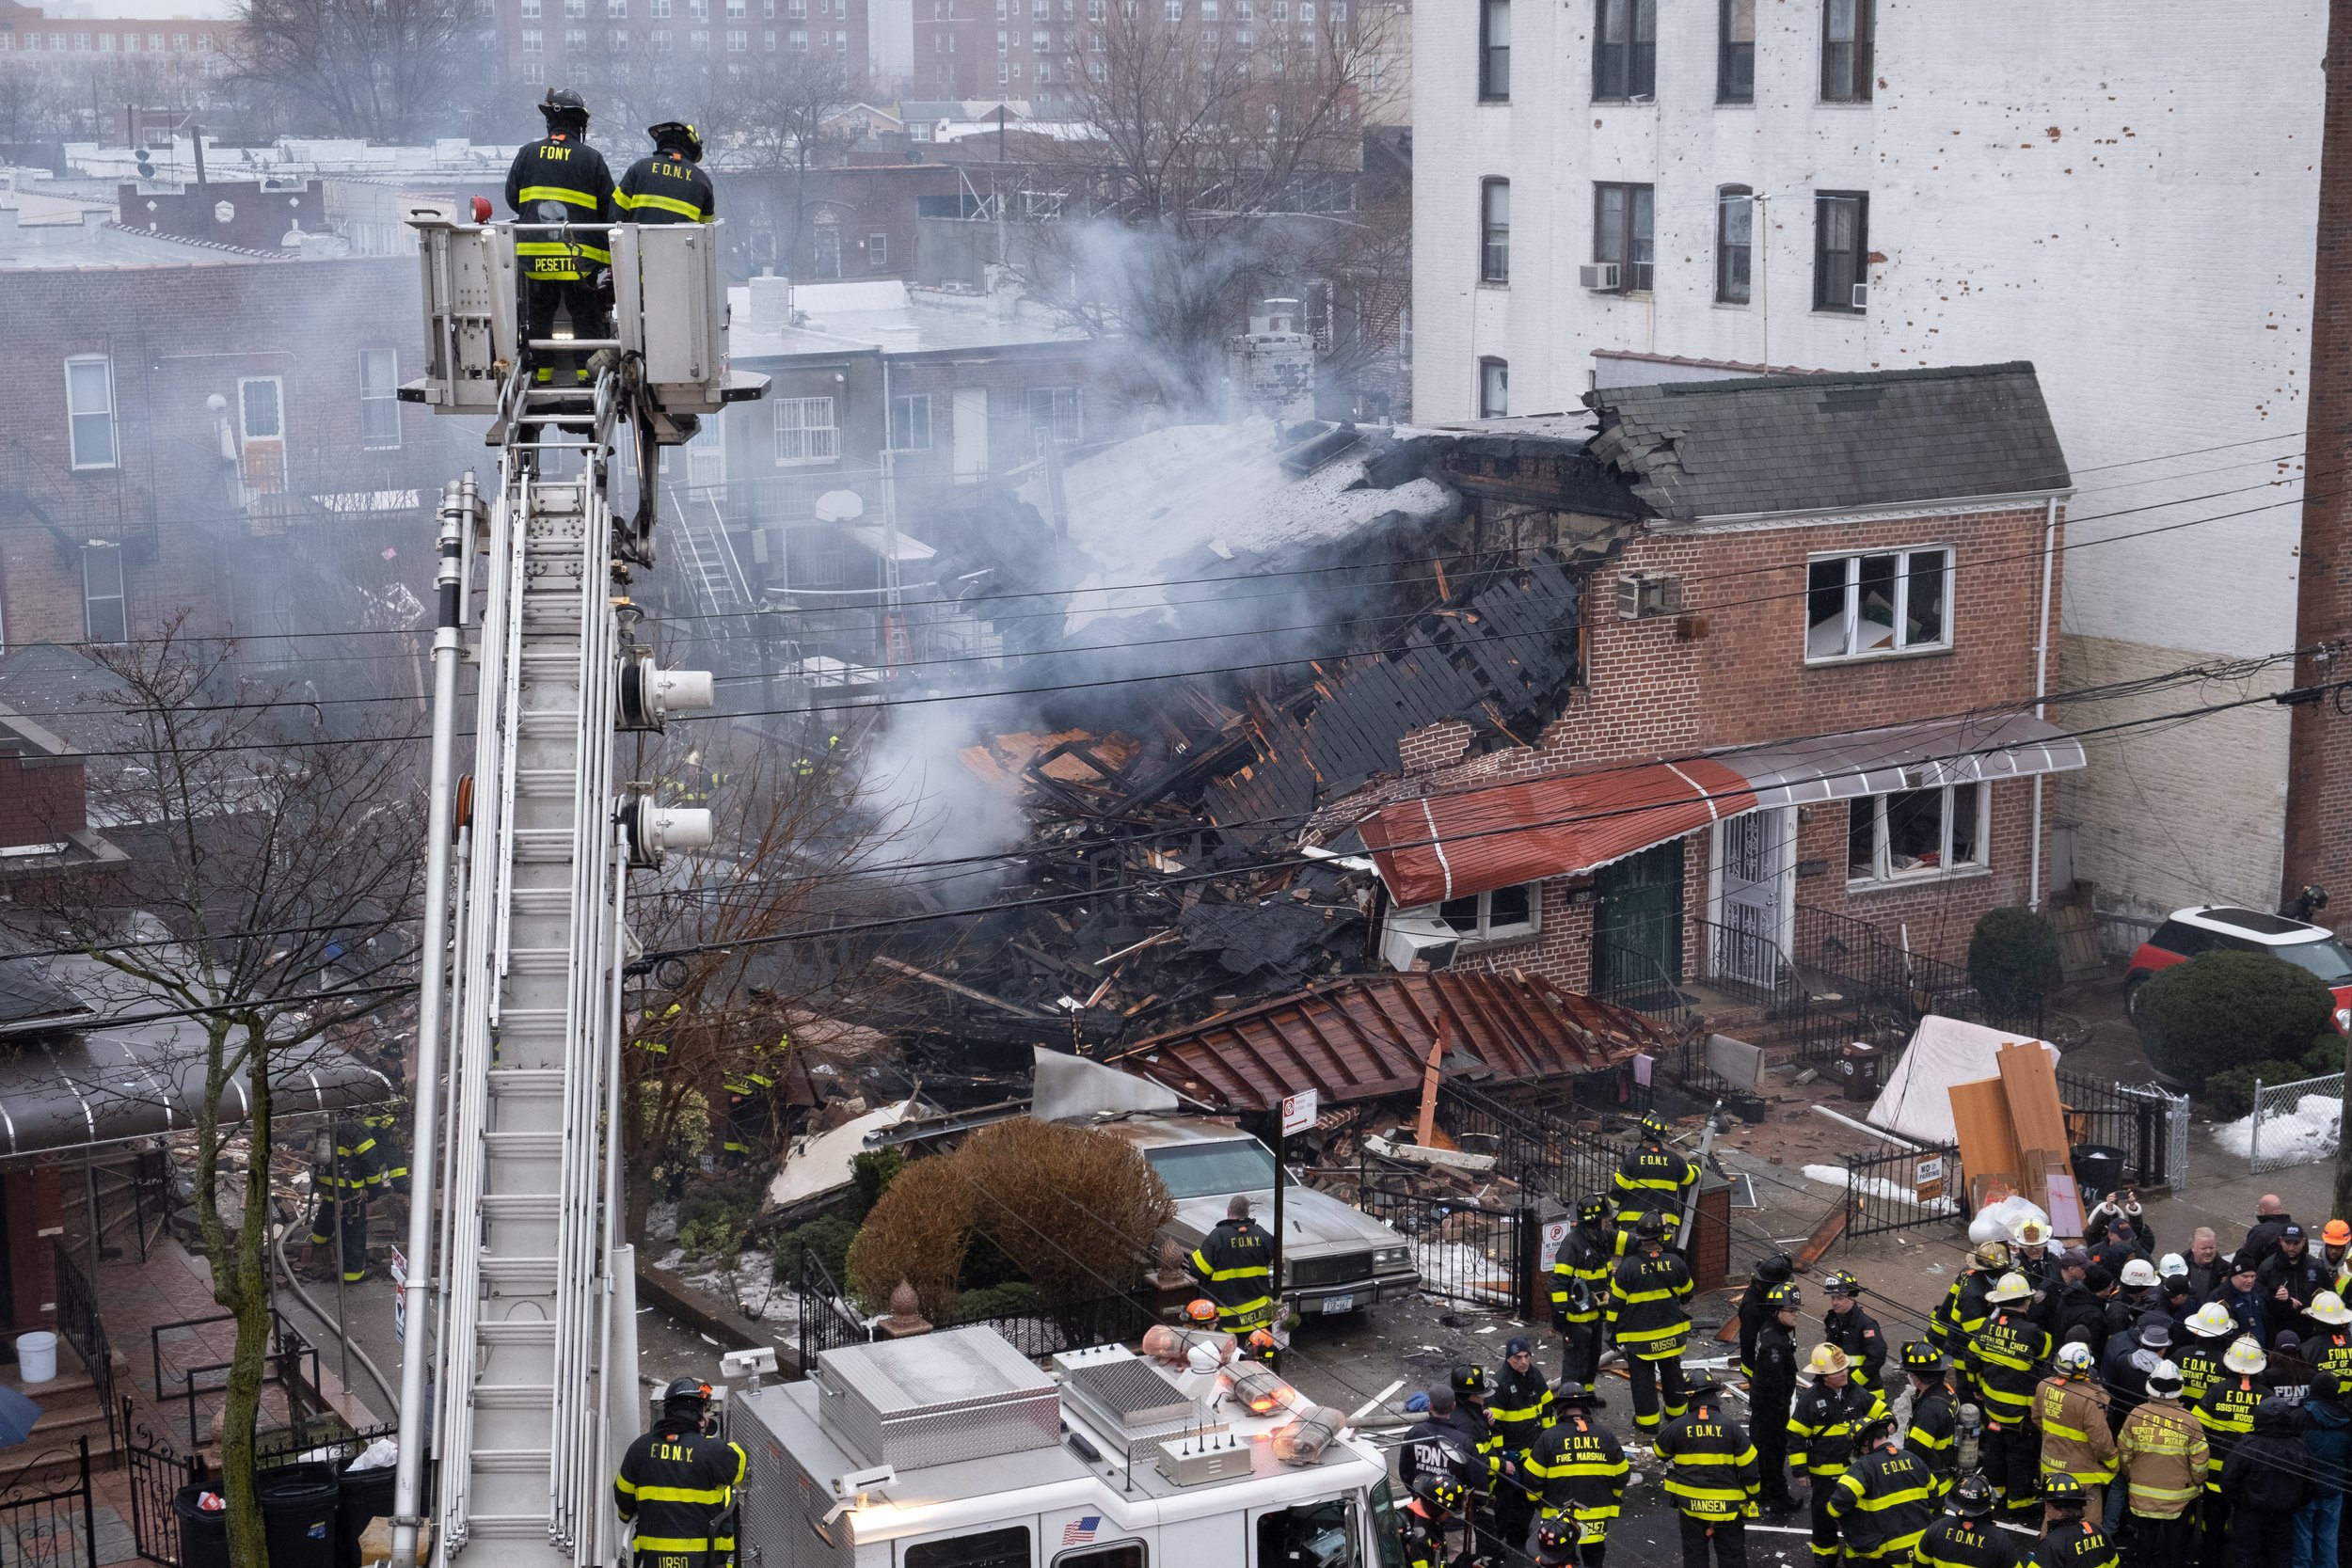  February 4th, 2022 - Brooklyn, NY: Firefighters were called to the scene of what remained of 67 Bay 35th St. at around 7:11 a.m. after a massive explosion from an apparent natural gas leak in an unoccupied home disintegrated a stretch of attached ho